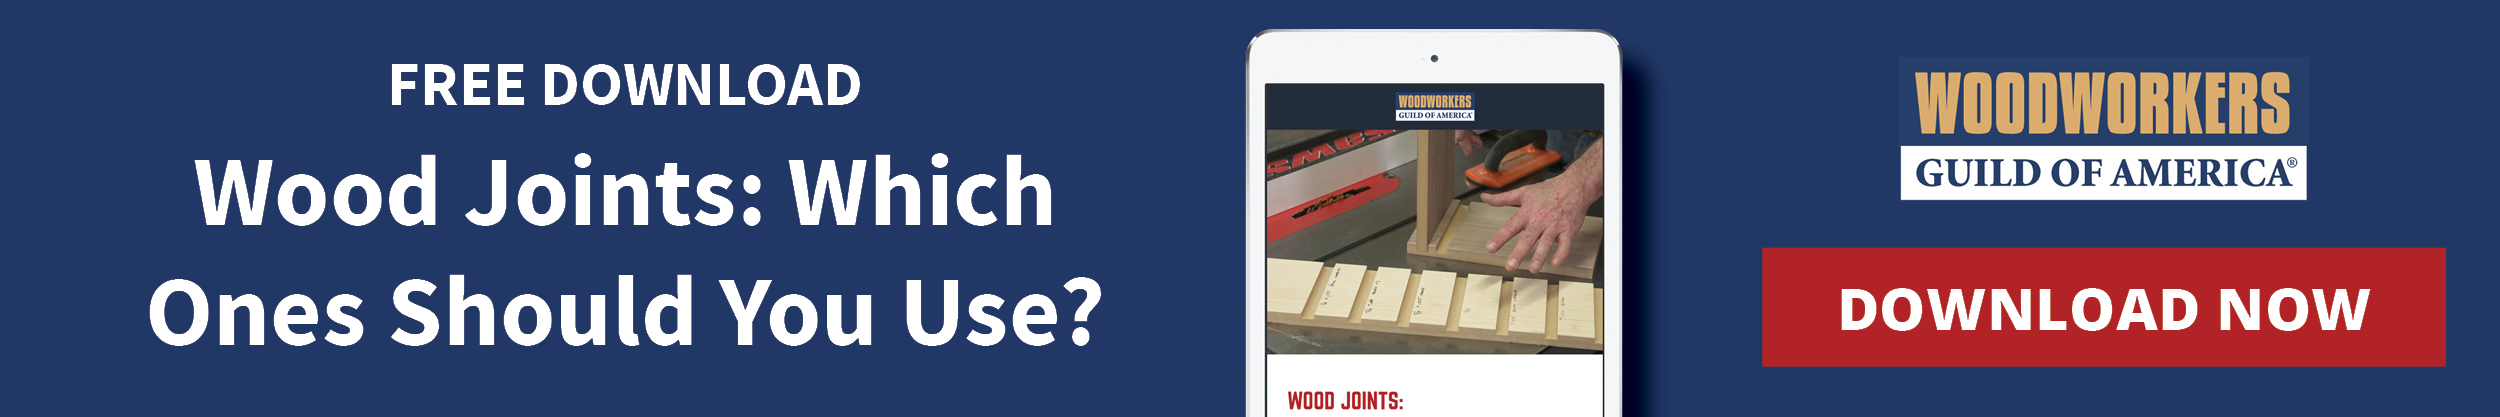 wood joints guide download email capture